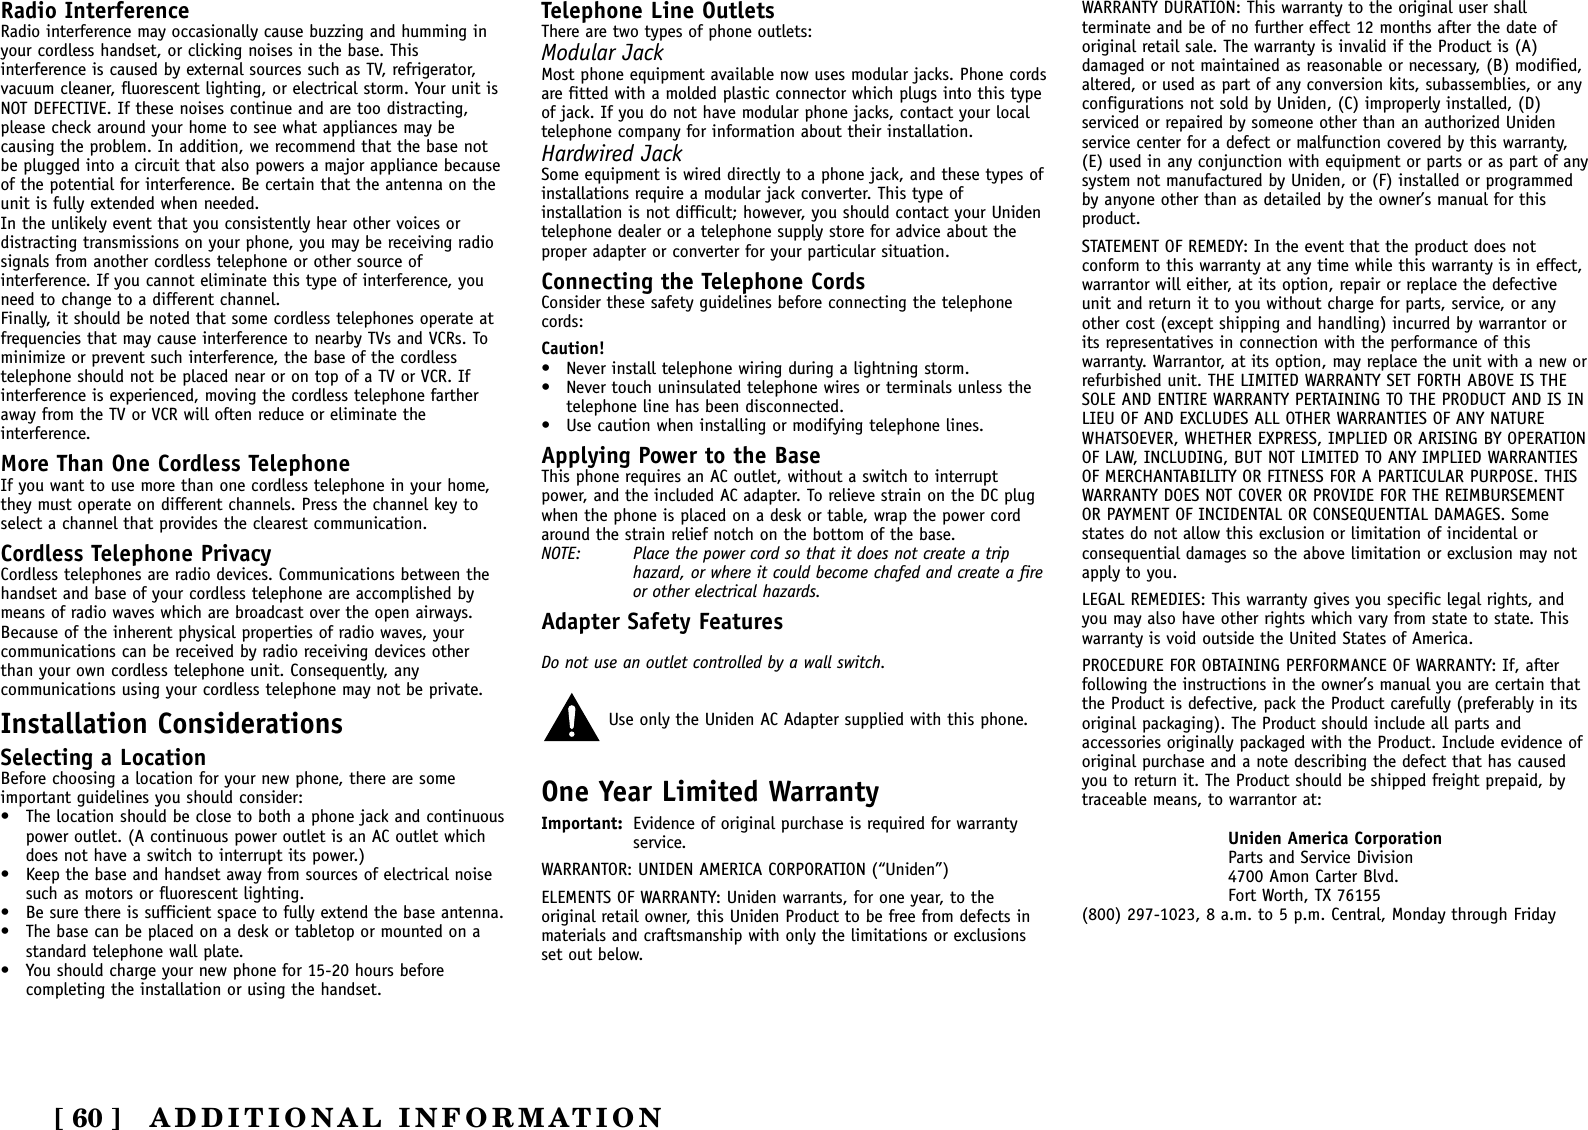 ADDITIONAL INFORMATION[ 60 ]Radio InterferenceRadio interference may occasionally cause buzzing and humming inyour cordless handset, or clicking noises in the base. Thisinterference is caused by external sources such as TV, refrigerator,vacuum cleaner, fluorescent lighting, or electrical storm. Your unit isNOT DEFECTIVE. If these noises continue and are too distracting,please check around your home to see what appliances may becausing the problem. In addition, we recommend that the base notbe plugged into a circuit that also powers a major appliance becauseof the potential for interference. Be certain that the antenna on theunit is fully extended when needed.In the unlikely event that you consistently hear other voices ordistracting transmissions on your phone, you may be receiving radiosignals from another cordless telephone or other source ofinterference. If you cannot eliminate this type of interference, youneed to change to a different channel.Finally, it should be noted that some cordless telephones operate atfrequencies that may cause interference to nearby TVs and VCRs. Tominimize or prevent such interference, the base of the cordlesstelephone should not be placed near or on top of a TV or VCR. Ifinterference is experienced, moving the cordless telephone fartheraway from the TV or VCR will often reduce or eliminate theinterference.More Than One Cordless TelephoneIf you want to use more than one cordless telephone in your home,they must operate on different channels. Press the channel key toselect a channel that provides the clearest communication.Cordless Telephone PrivacyCordless telephones are radio devices. Communications between thehandset and base of your cordless telephone are accomplished bymeans of radio waves which are broadcast over the open airways.Because of the inherent physical properties of radio waves, yourcommunications can be received by radio receiving devices otherthan your own cordless telephone unit. Consequently, anycommunications using your cordless telephone may not be private.Installation ConsiderationsSelecting a LocationBefore choosing a location for your new phone, there are someimportant guidelines you should consider:• The location should be close to both a phone jack and continuouspower outlet. (A continuous power outlet is an AC outlet whichdoes not have a switch to interrupt its power.)• Keep the base and handset away from sources of electrical noisesuch as motors or fluorescent lighting.• Be sure there is sufficient space to fully extend the base antenna.• The base can be placed on a desk or tabletop or mounted on astandard telephone wall plate.• You should charge your new phone for 15-20 hours beforecompleting the installation or using the handset.Telephone Line OutletsThere are two types of phone outlets:Modular JackMost phone equipment available now uses modular jacks. Phone cordsare fitted with a molded plastic connector which plugs into this typeof jack. If you do not have modular phone jacks, contact your localtelephone company for information about their installation.Hardwired JackSome equipment is wired directly to a phone jack, and these types ofinstallations require a modular jack converter. This type ofinstallation is not difficult; however, you should contact your Unidentelephone dealer or a telephone supply store for advice about theproper adapter or converter for your particular situation.Connecting the Telephone CordsConsider these safety guidelines before connecting the telephonecords:Caution!• Never install telephone wiring during a lightning storm.• Never touch uninsulated telephone wires or terminals unless thetelephone line has been disconnected.• Use caution when installing or modifying telephone lines.Applying Power to the BaseThis phone requires an AC outlet, without a switch to interruptpower, and the included AC adapter. To relieve strain on the DC plugwhen the phone is placed on a desk or table, wrap the power cordaround the strain relief notch on the bottom of the base.NOTE: Place the power cord so that it does not create a triphazard, or where it could become chafed and create a fireor other electrical hazards.Adapter Safety FeaturesDo not use an outlet controlled by a wall switch.Use only the Uniden AC Adapter supplied with this phone.One Year Limited WarrantyImportant: Evidence of original purchase is required for warrantyservice.WARRANTOR: UNIDEN AMERICA CORPORATION (“Uniden”)ELEMENTS OF WARRANTY: Uniden warrants, for one year, to theoriginal retail owner, this Uniden Product to be free from defects inmaterials and craftsmanship with only the limitations or exclusionsset out below.WARRANTY DURATION: This warranty to the original user shallterminate and be of no further effect 12 months after the date oforiginal retail sale. The warranty is invalid if the Product is (A)damaged or not maintained as reasonable or necessary, (B) modified,altered, or used as part of any conversion kits, subassemblies, or anyconfigurations not sold by Uniden, (C) improperly installed, (D)serviced or repaired by someone other than an authorized Unidenservice center for a defect or malfunction covered by this warranty,(E) used in any conjunction with equipment or parts or as part of anysystem not manufactured by Uniden, or (F) installed or programmedby anyone other than as detailed by the owner’s manual for thisproduct.STATEMENT OF REMEDY: In the event that the product does notconform to this warranty at any time while this warranty is in effect,warrantor will either, at its option, repair or replace the defectiveunit and return it to you without charge for parts, service, or anyother cost (except shipping and handling) incurred by warrantor orits representatives in connection with the performance of thiswarranty. Warrantor, at its option, may replace the unit with a new orrefurbished unit. THE LIMITED WARRANTY SET FORTH ABOVE IS THESOLE AND ENTIRE WARRANTY PERTAINING TO THE PRODUCT AND IS INLIEU OF AND EXCLUDES ALL OTHER WARRANTIES OF ANY NATUREWHATSOEVER, WHETHER EXPRESS, IMPLIED OR ARISING BY OPERATIONOF LAW, INCLUDING, BUT NOT LIMITED TO ANY IMPLIED WARRANTIESOF MERCHANTABILITY OR FITNESS FOR A PARTICULAR PURPOSE. THISWARRANTY DOES NOT COVER OR PROVIDE FOR THE REIMBURSEMENTOR PAYMENT OF INCIDENTAL OR CONSEQUENTIAL DAMAGES. Somestates do not allow this exclusion or limitation of incidental orconsequential damages so the above limitation or exclusion may notapply to you.LEGAL REMEDIES: This warranty gives you specific legal rights, andyou may also have other rights which vary from state to state. Thiswarranty is void outside the United States of America.PROCEDURE FOR OBTAINING PERFORMANCE OF WARRANTY: If, afterfollowing the instructions in the owner’s manual you are certain thatthe Product is defective, pack the Product carefully (preferably in itsoriginal packaging). The Product should include all parts andaccessories originally packaged with the Product. Include evidence oforiginal purchase and a note describing the defect that has causedyou to return it. The Product should be shipped freight prepaid, bytraceable means, to warrantor at:Uniden America CorporationParts and Service Division4700 Amon Carter Blvd.Fort Worth, TX 76155(800) 297-1023, 8 a.m. to 5 p.m. Central, Monday through Friday